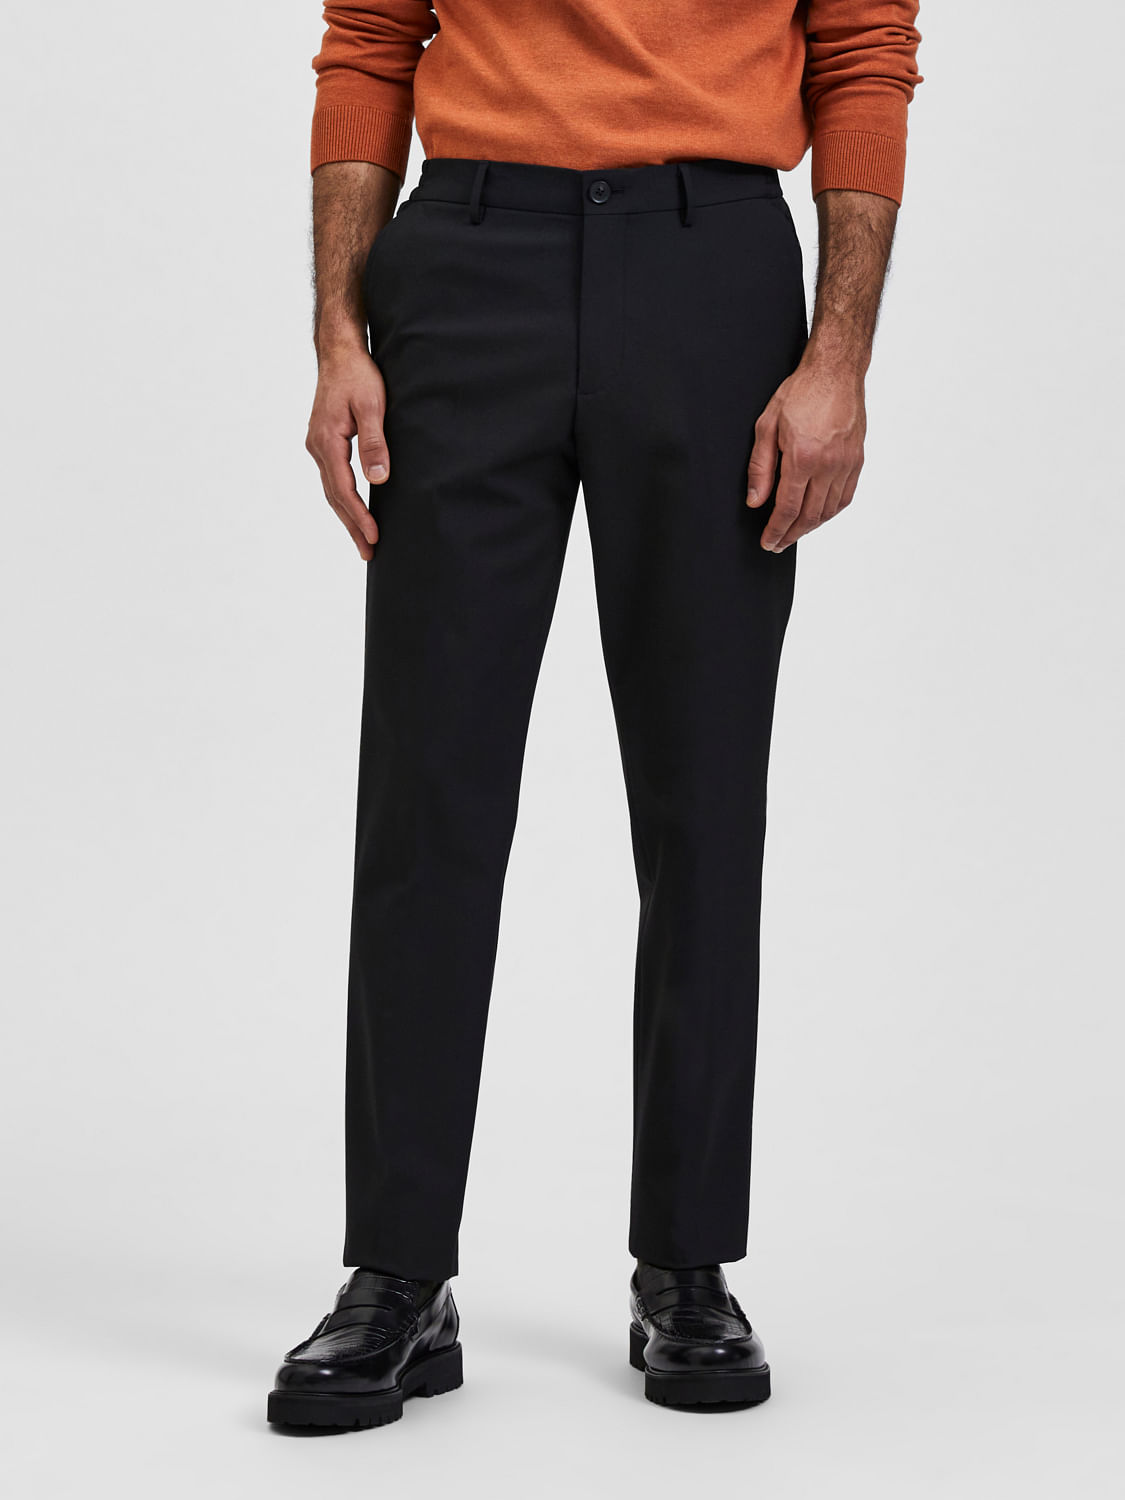 Tailored & Formal trousers Alberto Biani - cropped tailored trousers -  CC844AC0028400